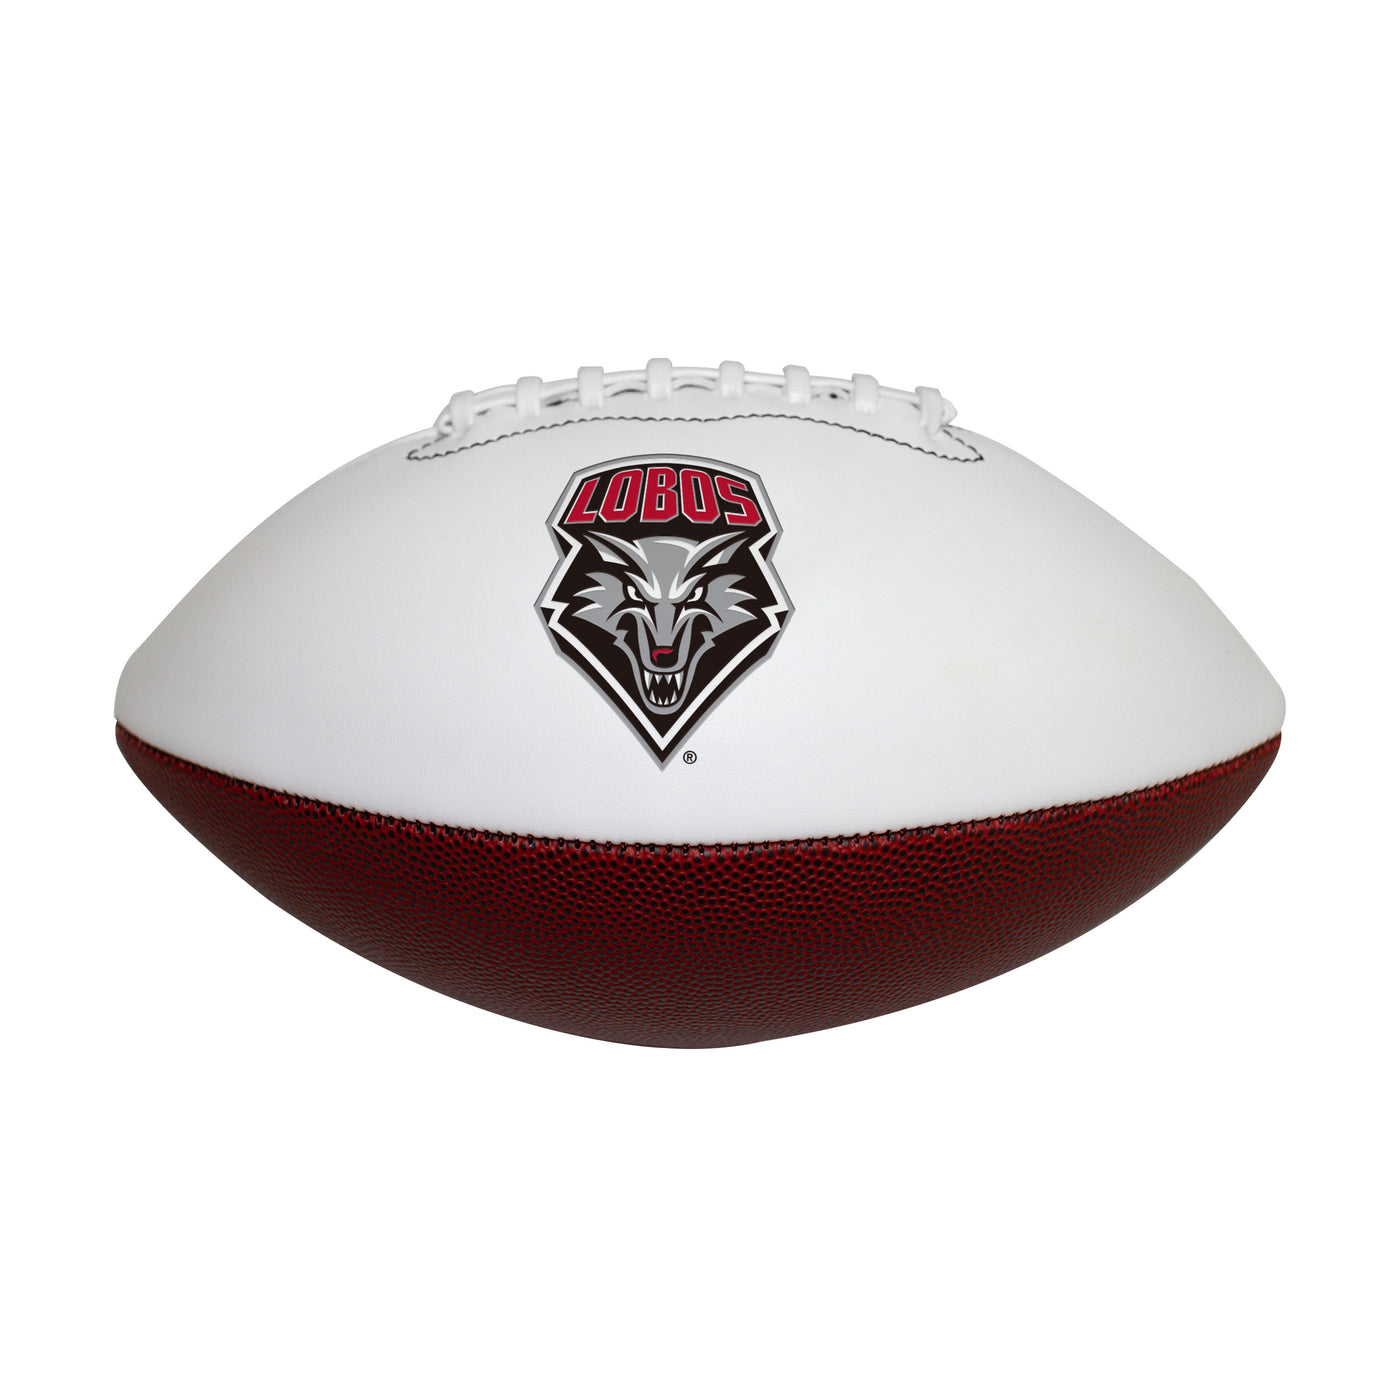 New Mexico Official-Size Autograph Football